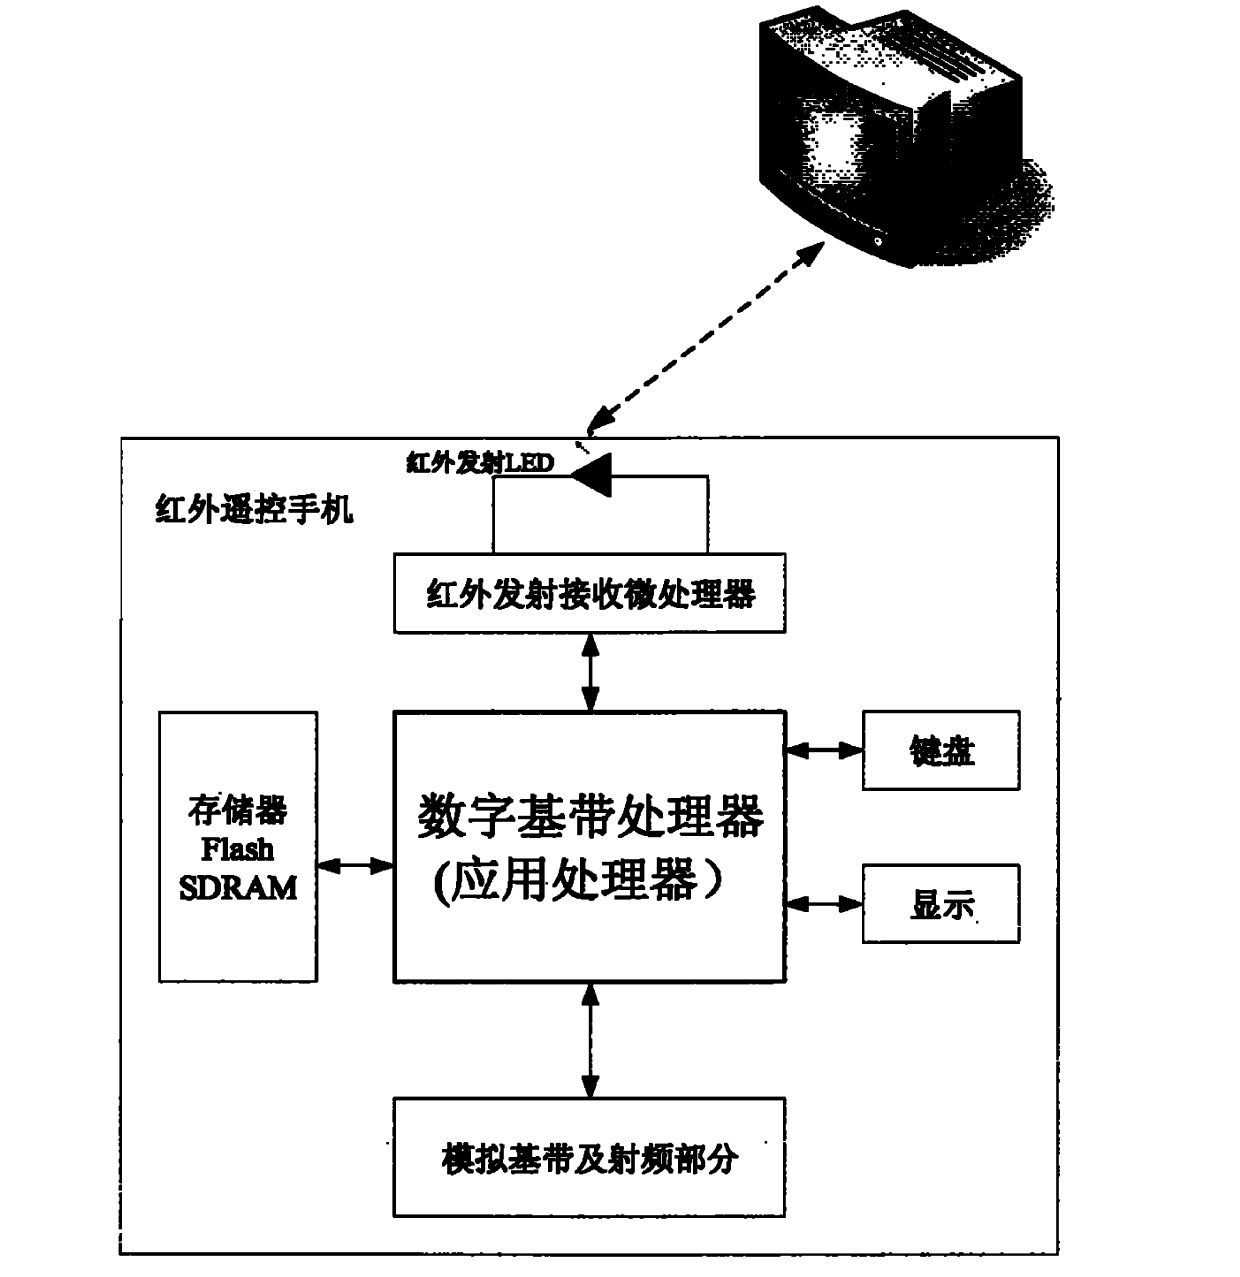 Method for realizing network download infrared remote control function by mobile phone